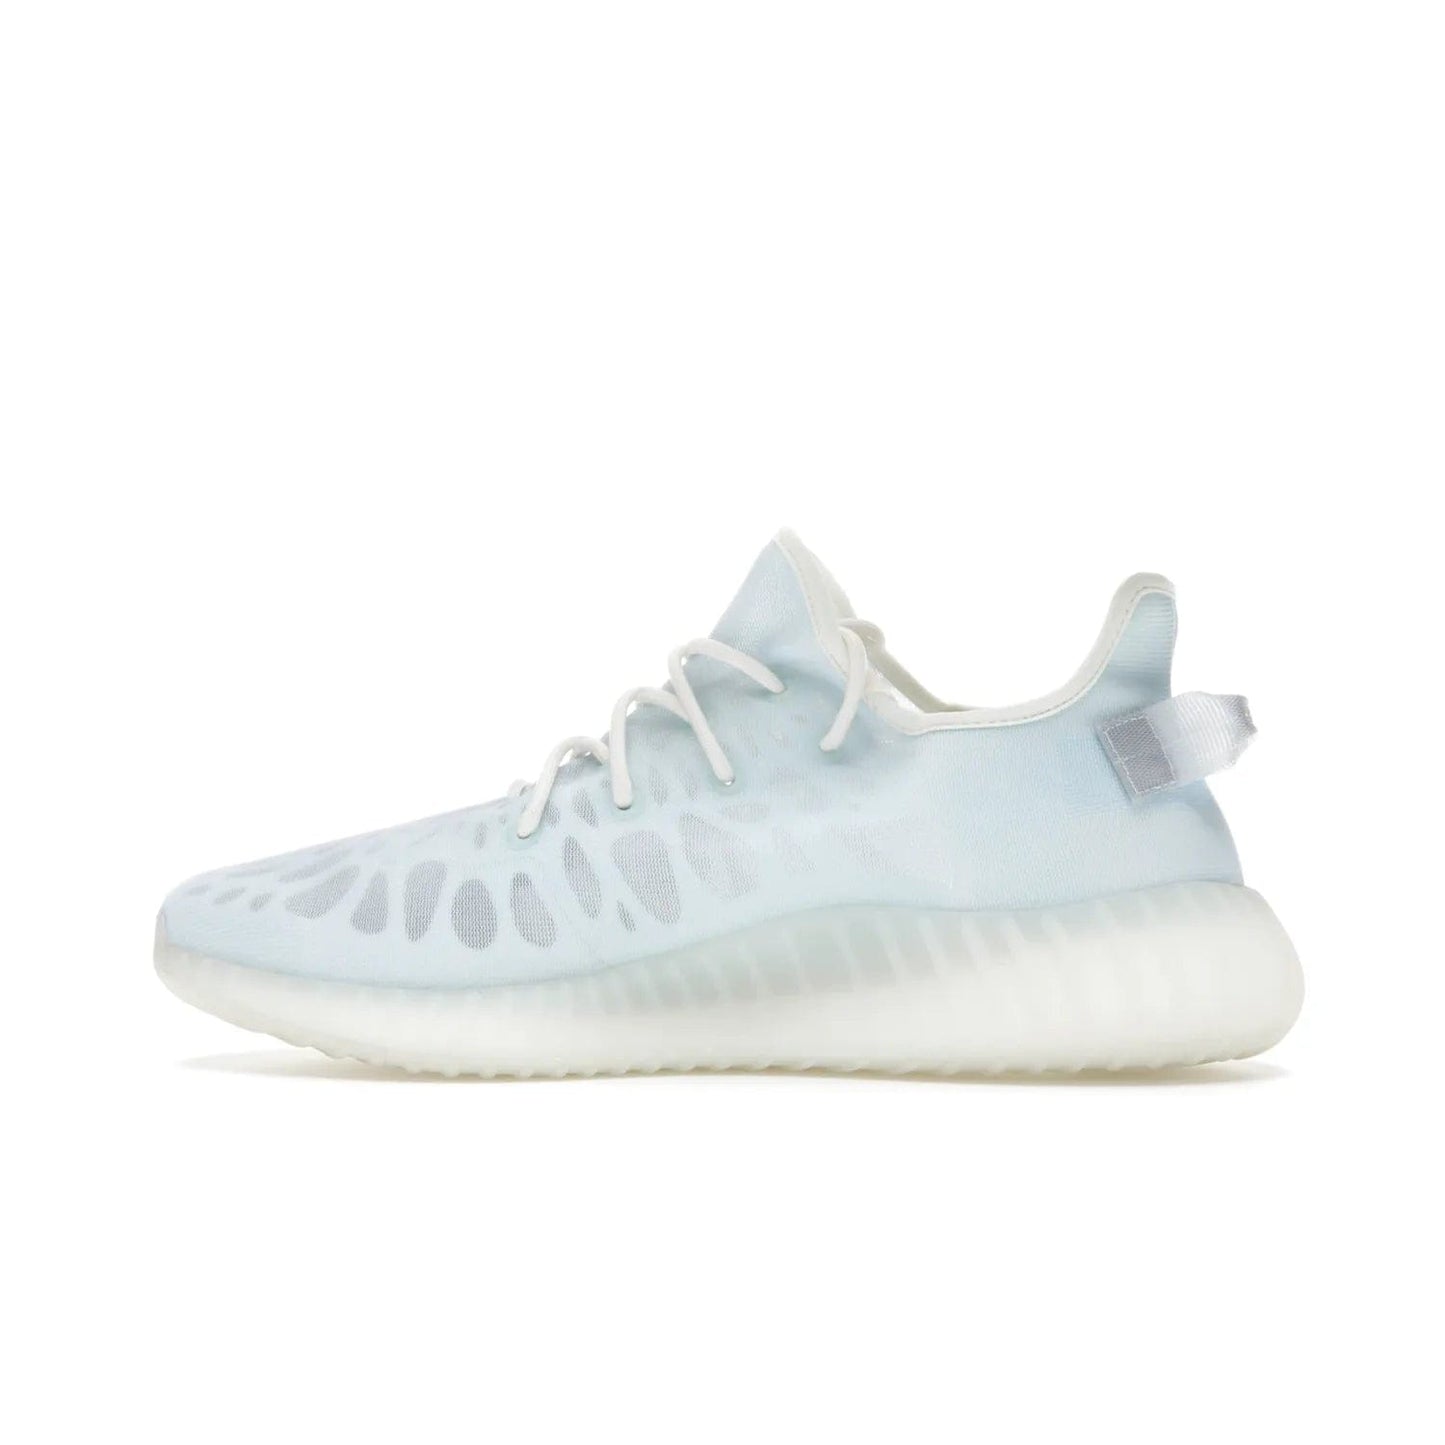 adidas Yeezy Boost 350 V2 Mono Ice - Image 20 - Only at www.BallersClubKickz.com - Introducing the adidas Yeezy 350 V2 Mono Ice - a sleek monofilament mesh design in Ice blue with Boost sole and heel pull tab. Released exclusively in the US for $220.